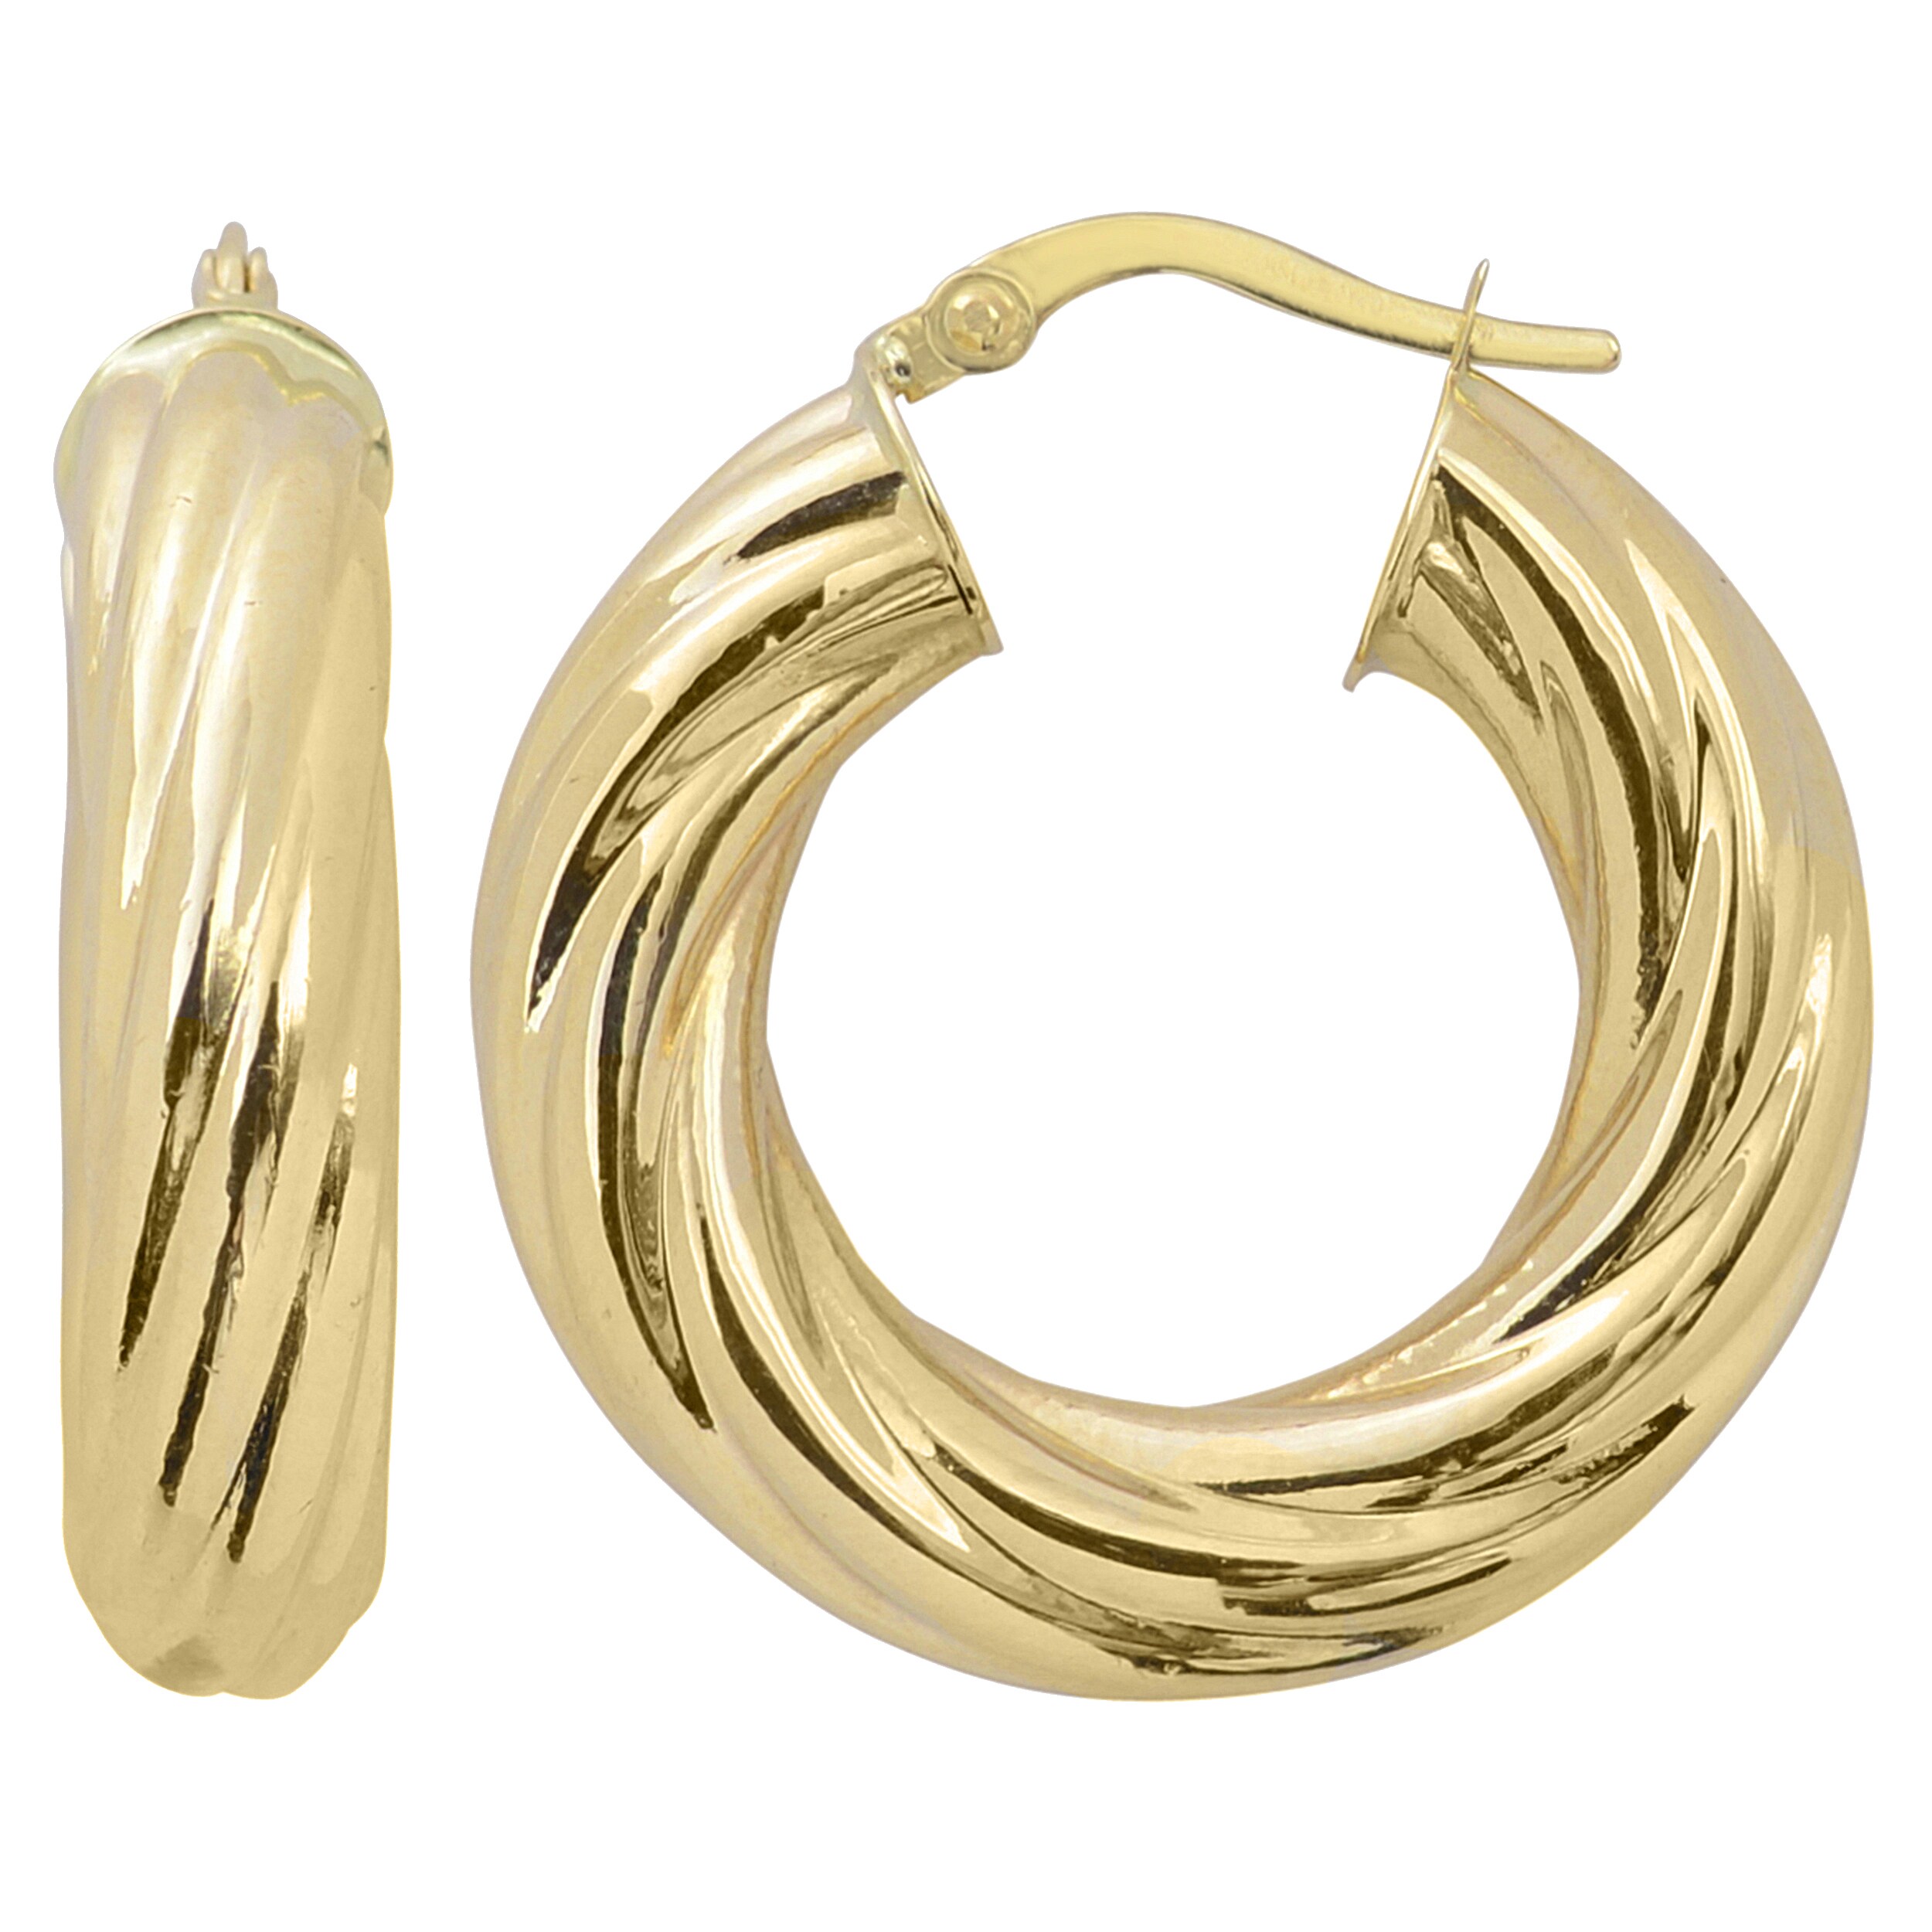 Ladies 14k Gold Tri-color Satin Finish Twisted Hinged Hoop Earrings 23mm x 3mm